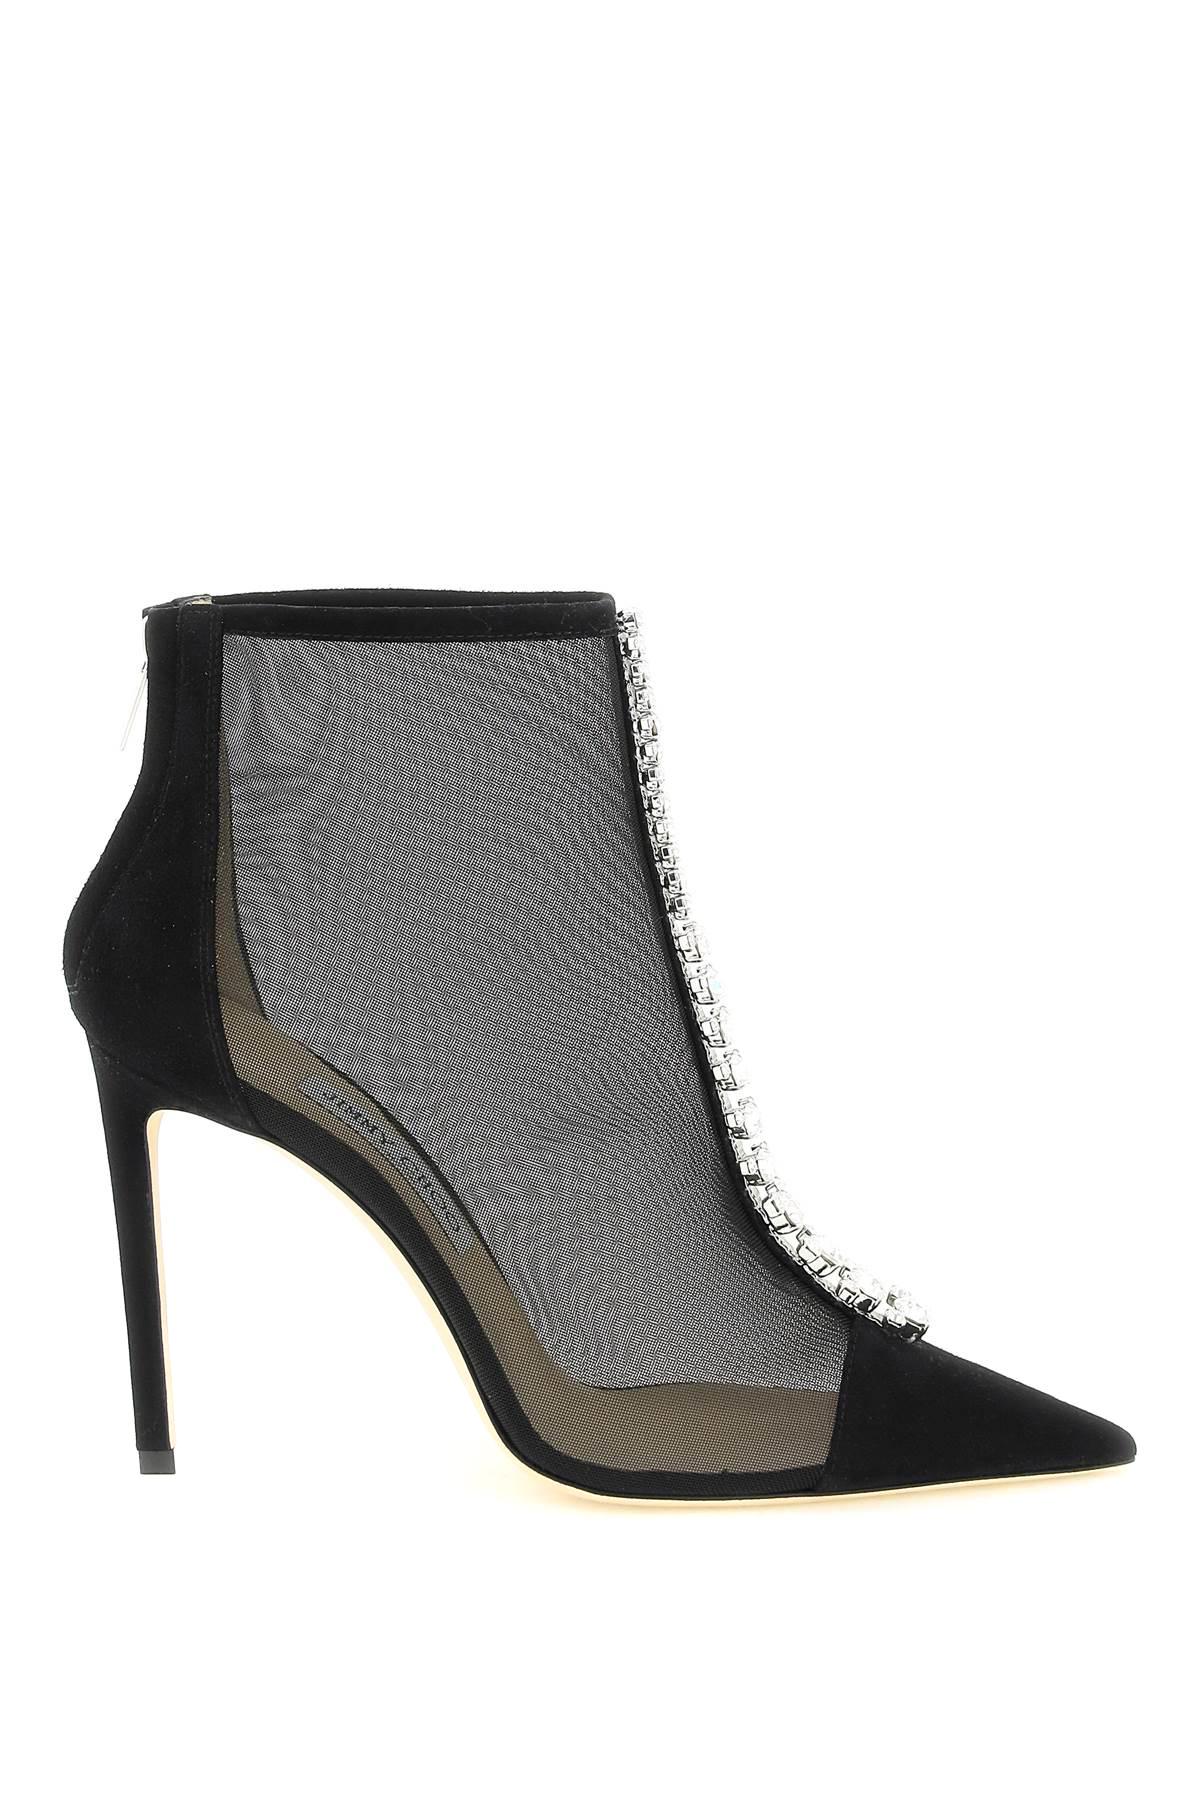 Women's Bing 100 Ankle Boots by Jimmy Choo | Coltorti Boutique